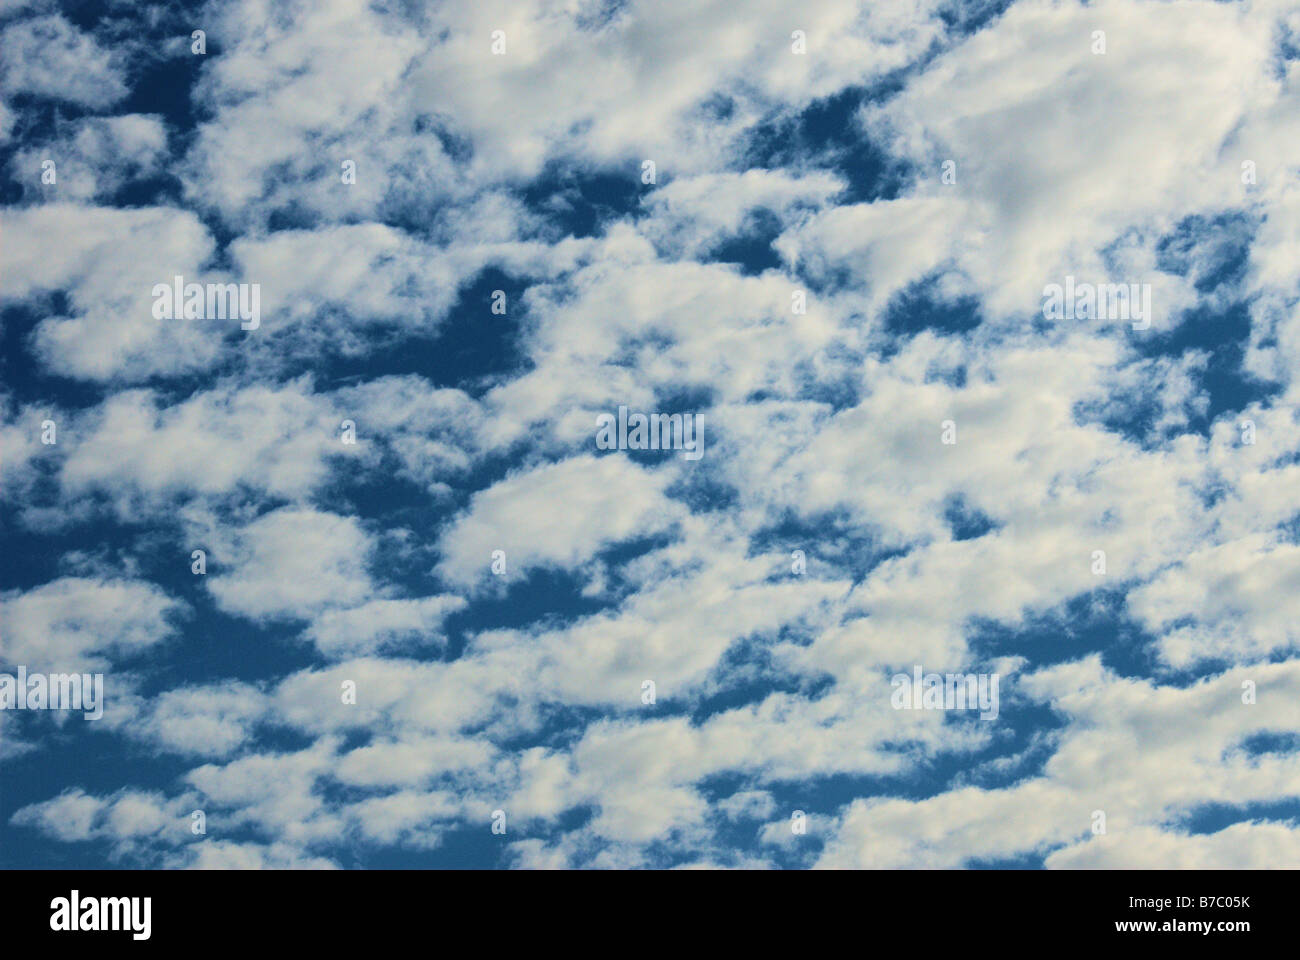 Fluffy white clouds against a bright blue sky Stock Photo